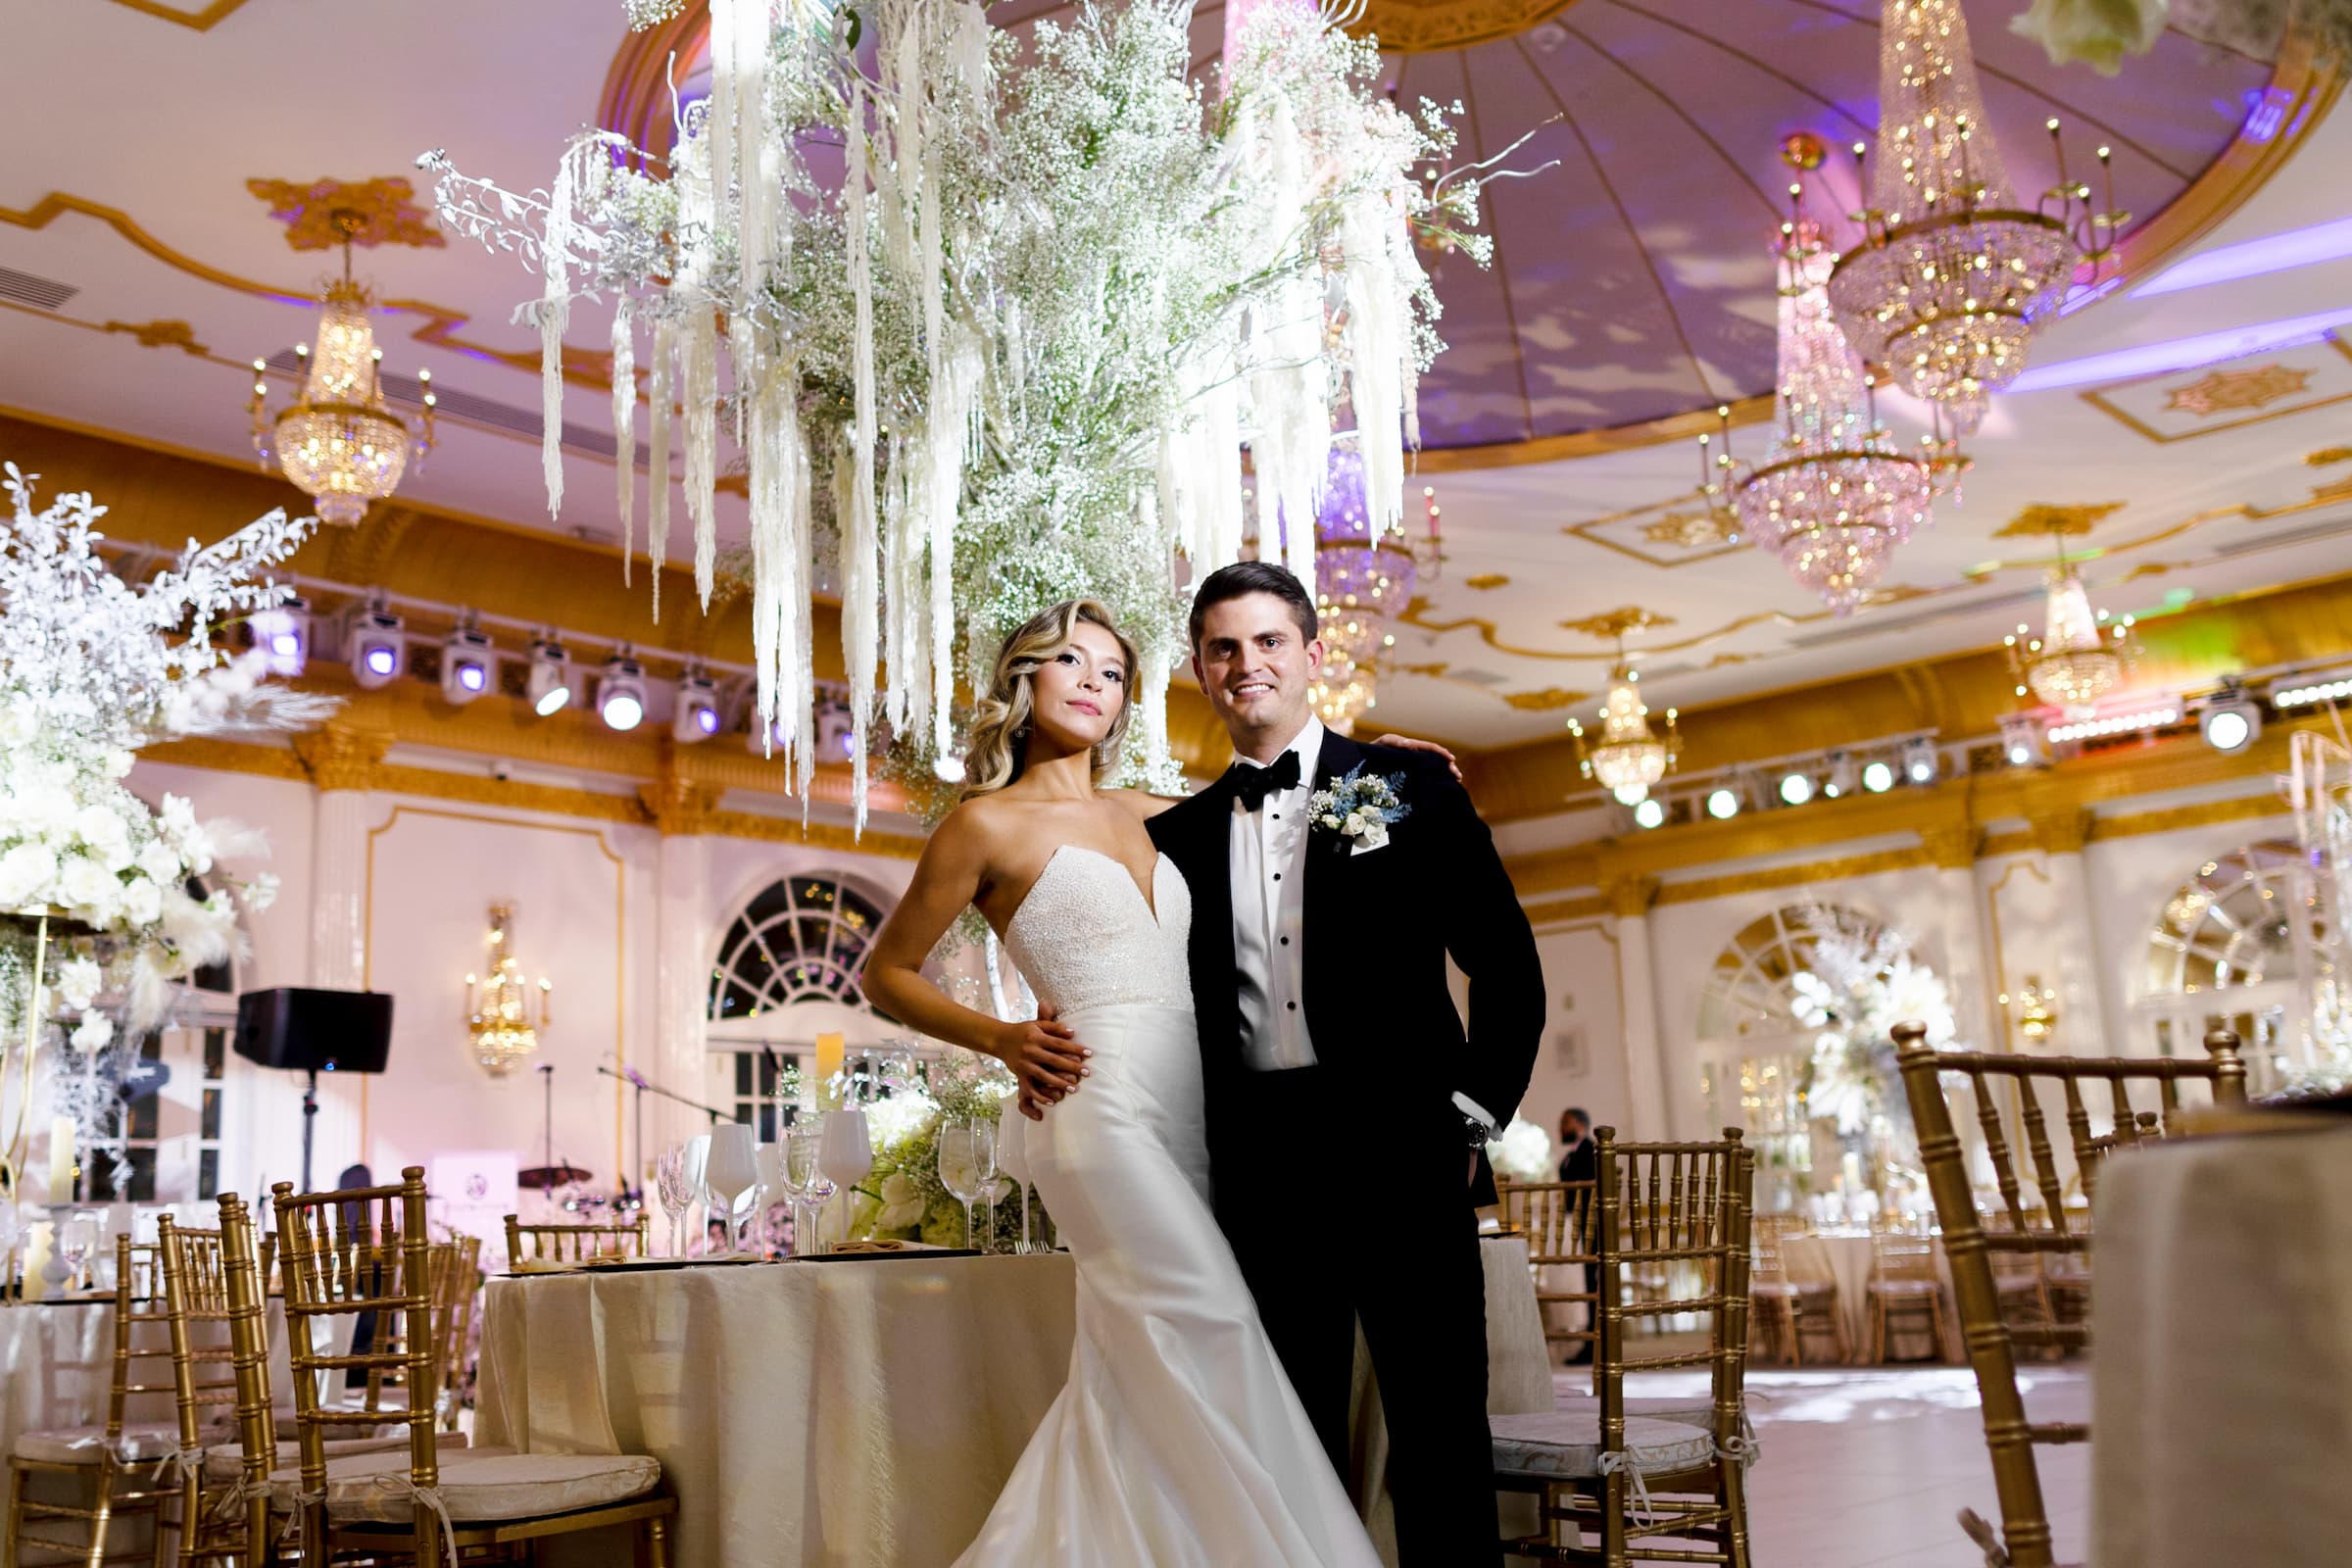 In front of a very tall, waterfall-like centerpiece that resembles a tree with long white decorations hanging off of it, the bride and groom pose with their around each other in an otherwise empty ballroom.